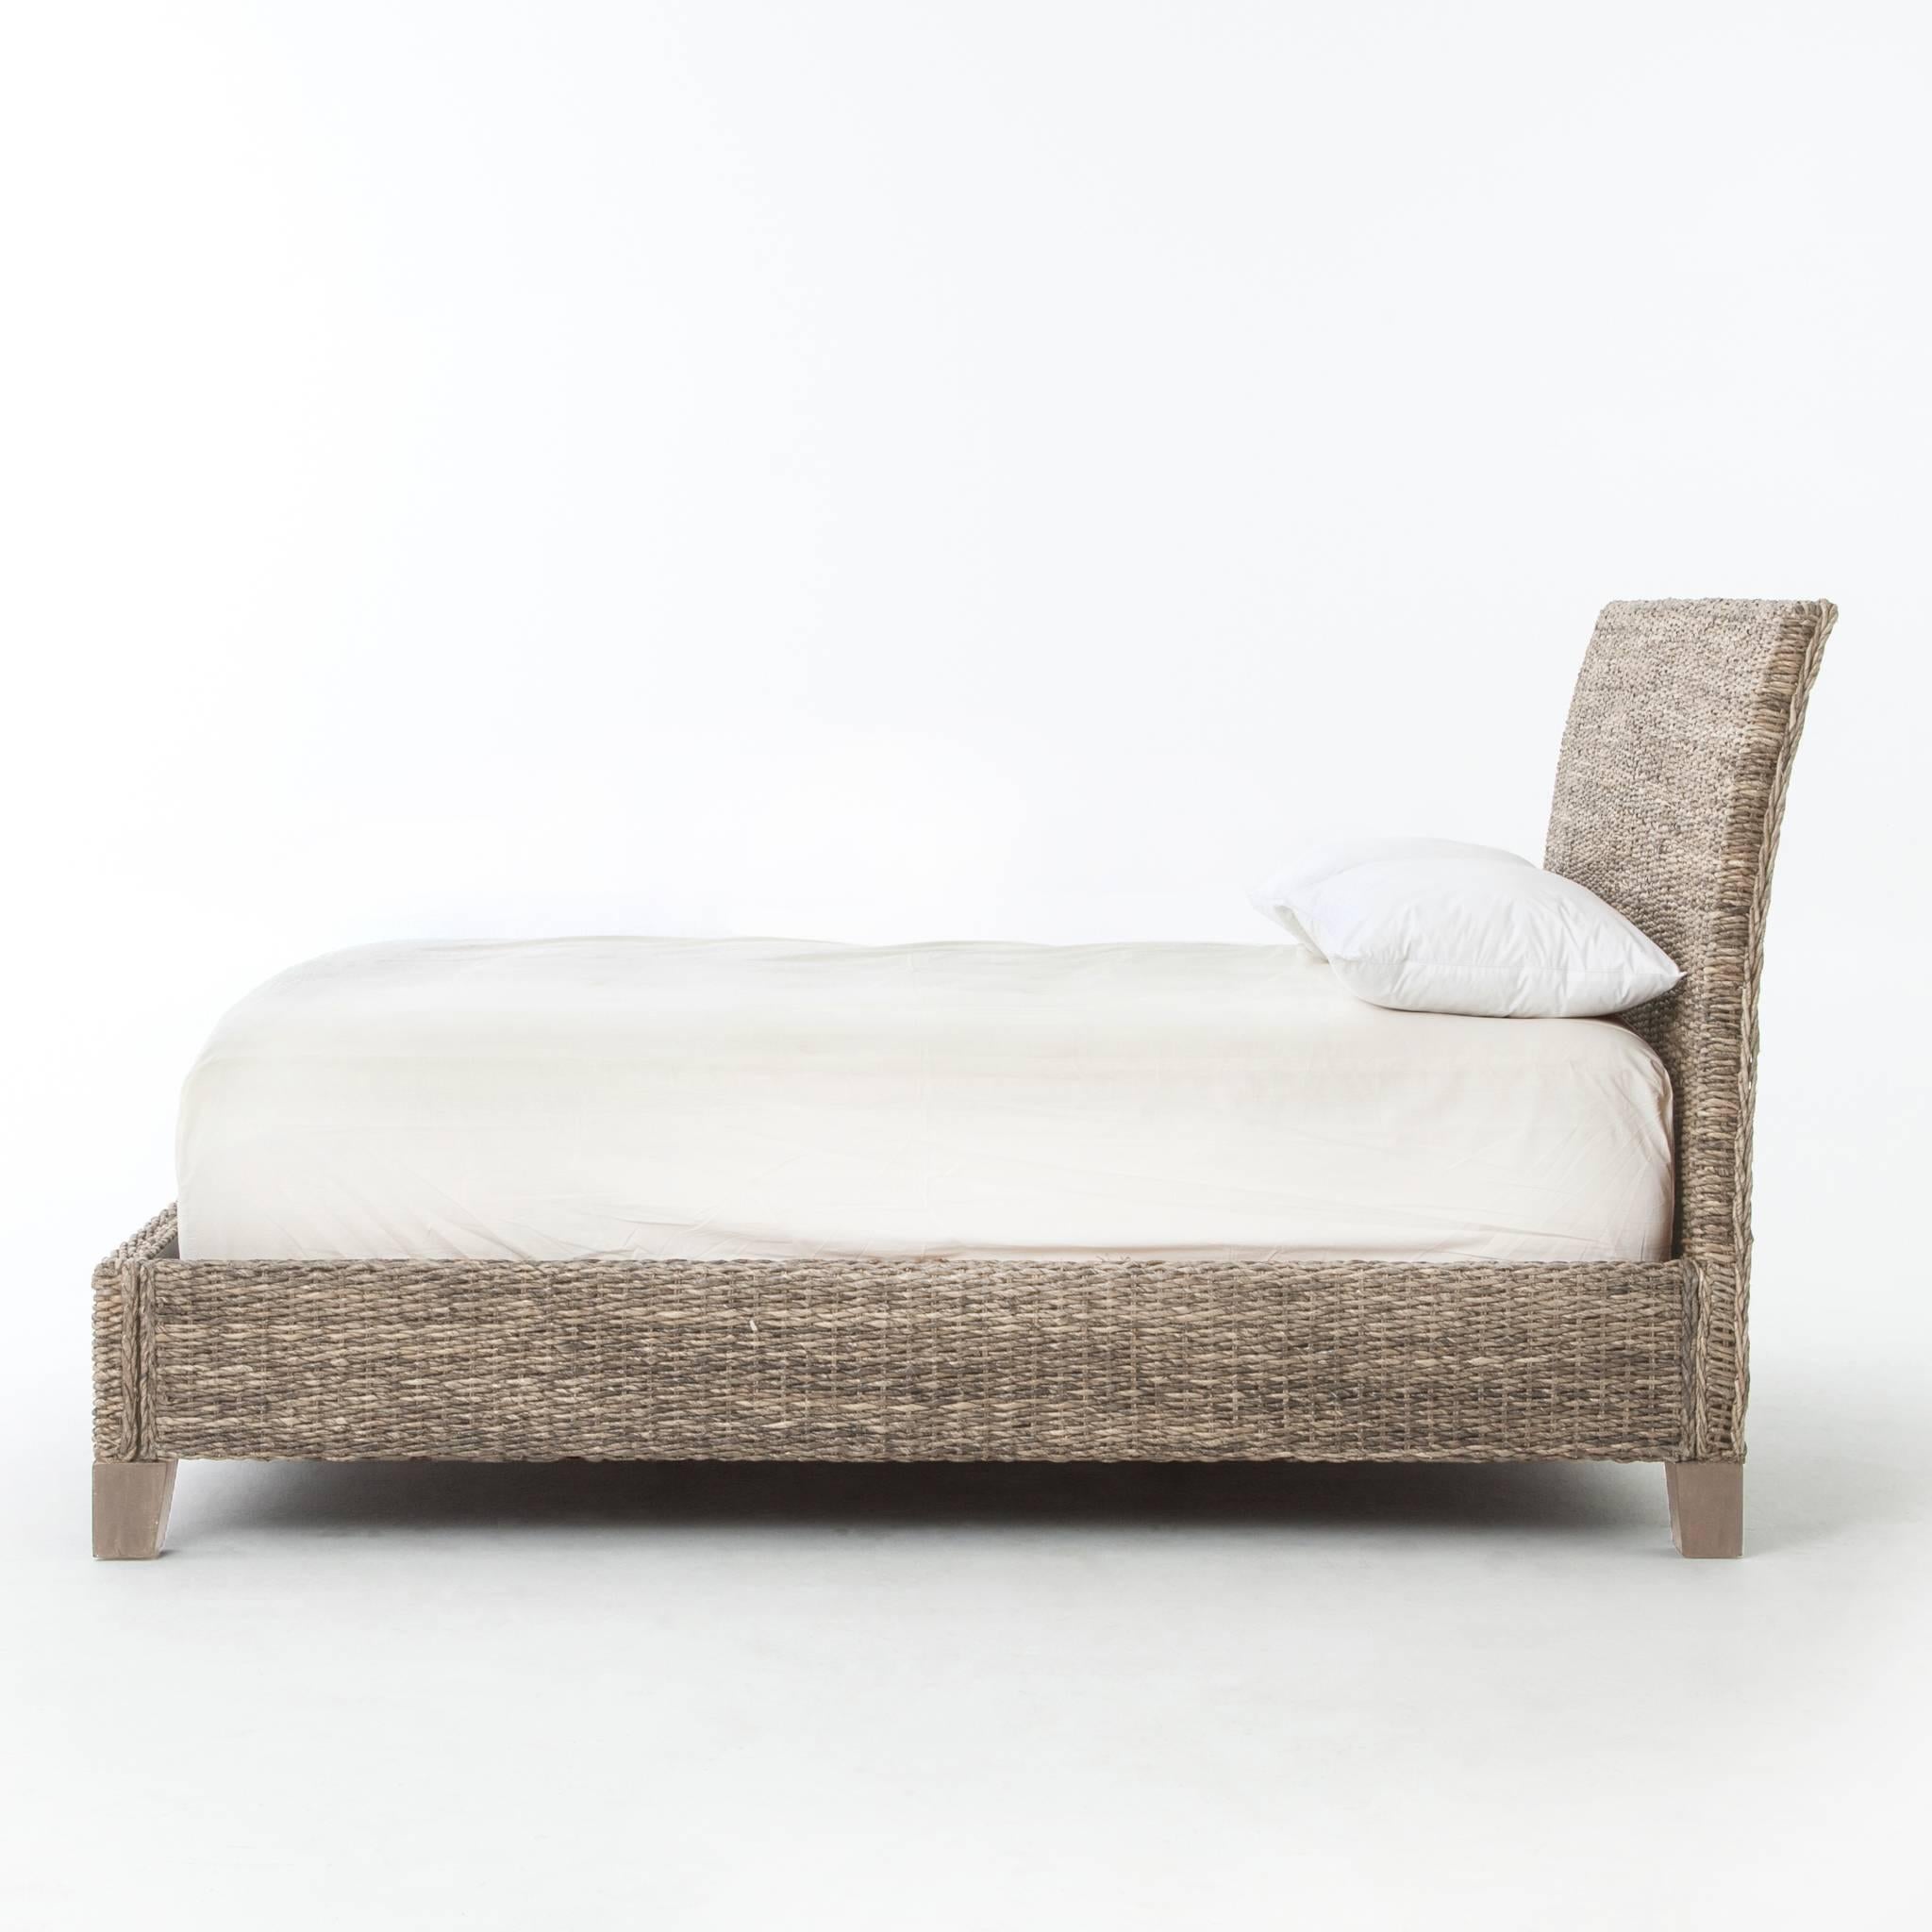 A stylish eco friendly complete bed, made from dried, woven banana leaf, in King and Queen
King $ 1895.00
Queen $ 1750.00.